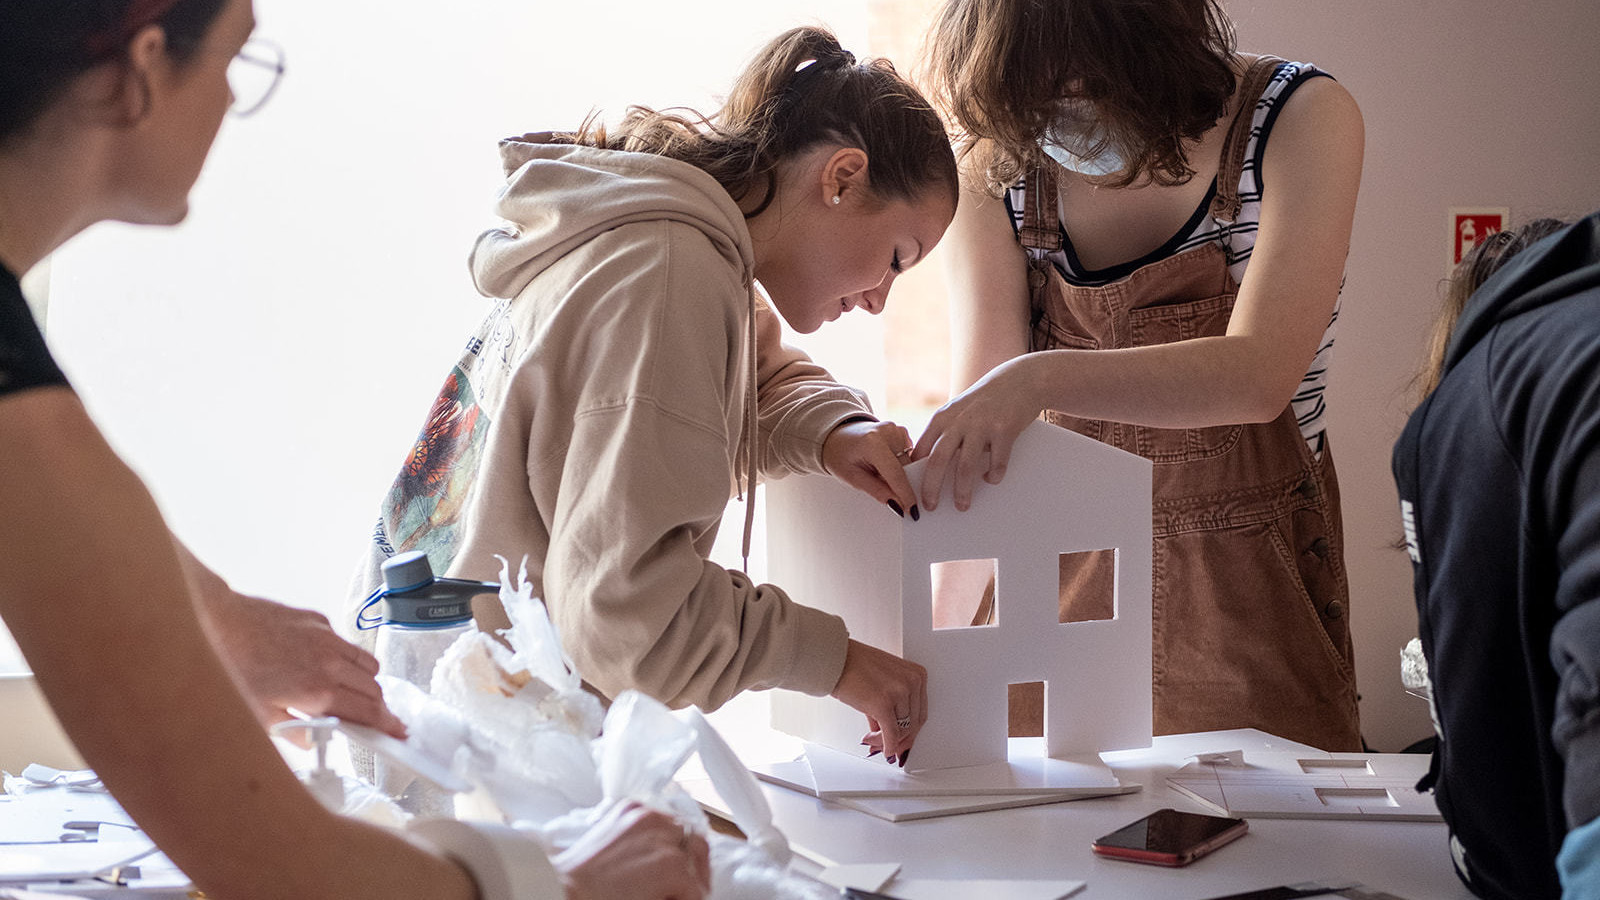 Two young women build a model of a house together from cardboard